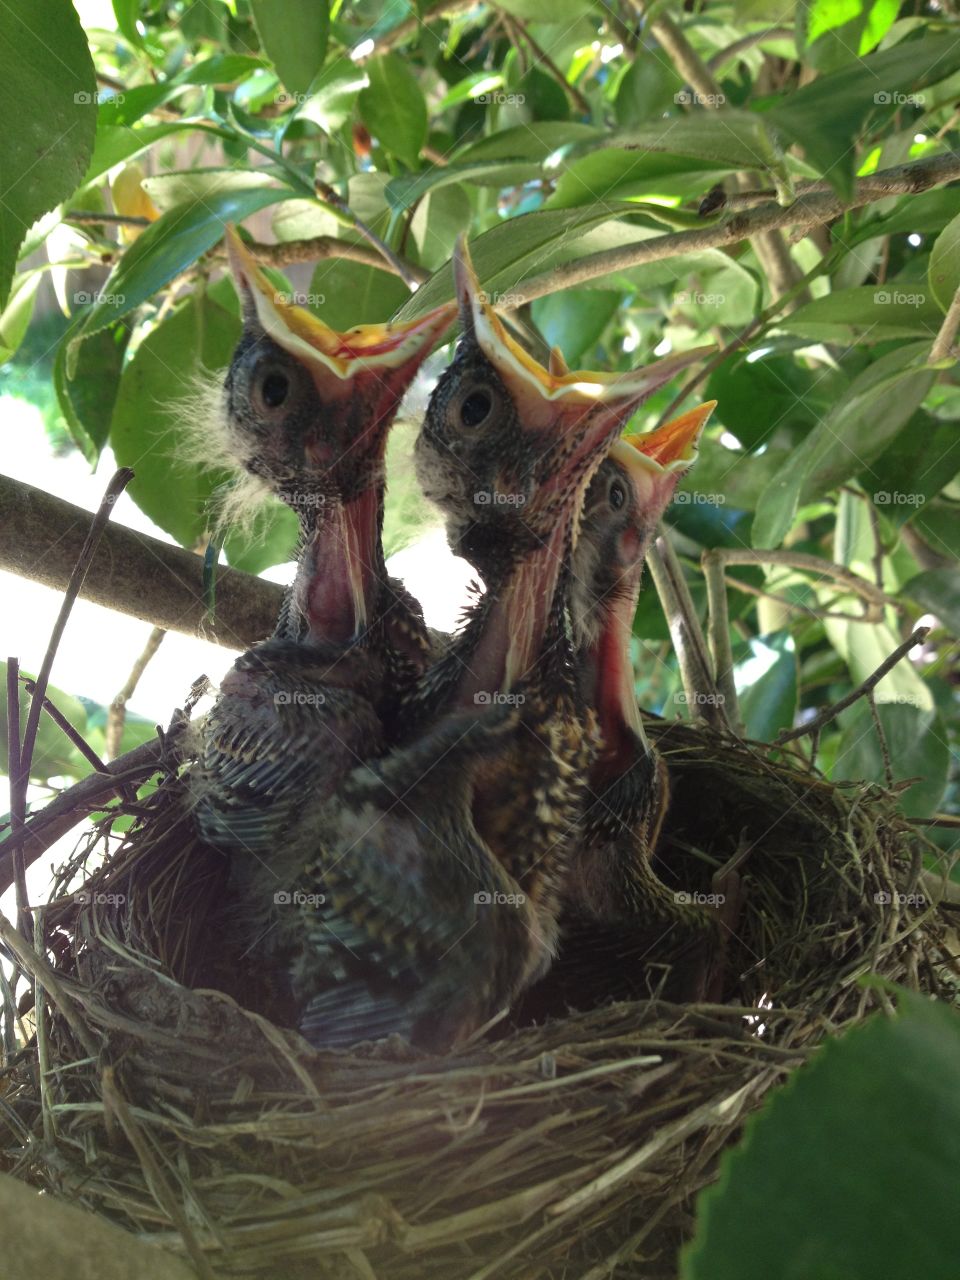 Baby birds waiting for food